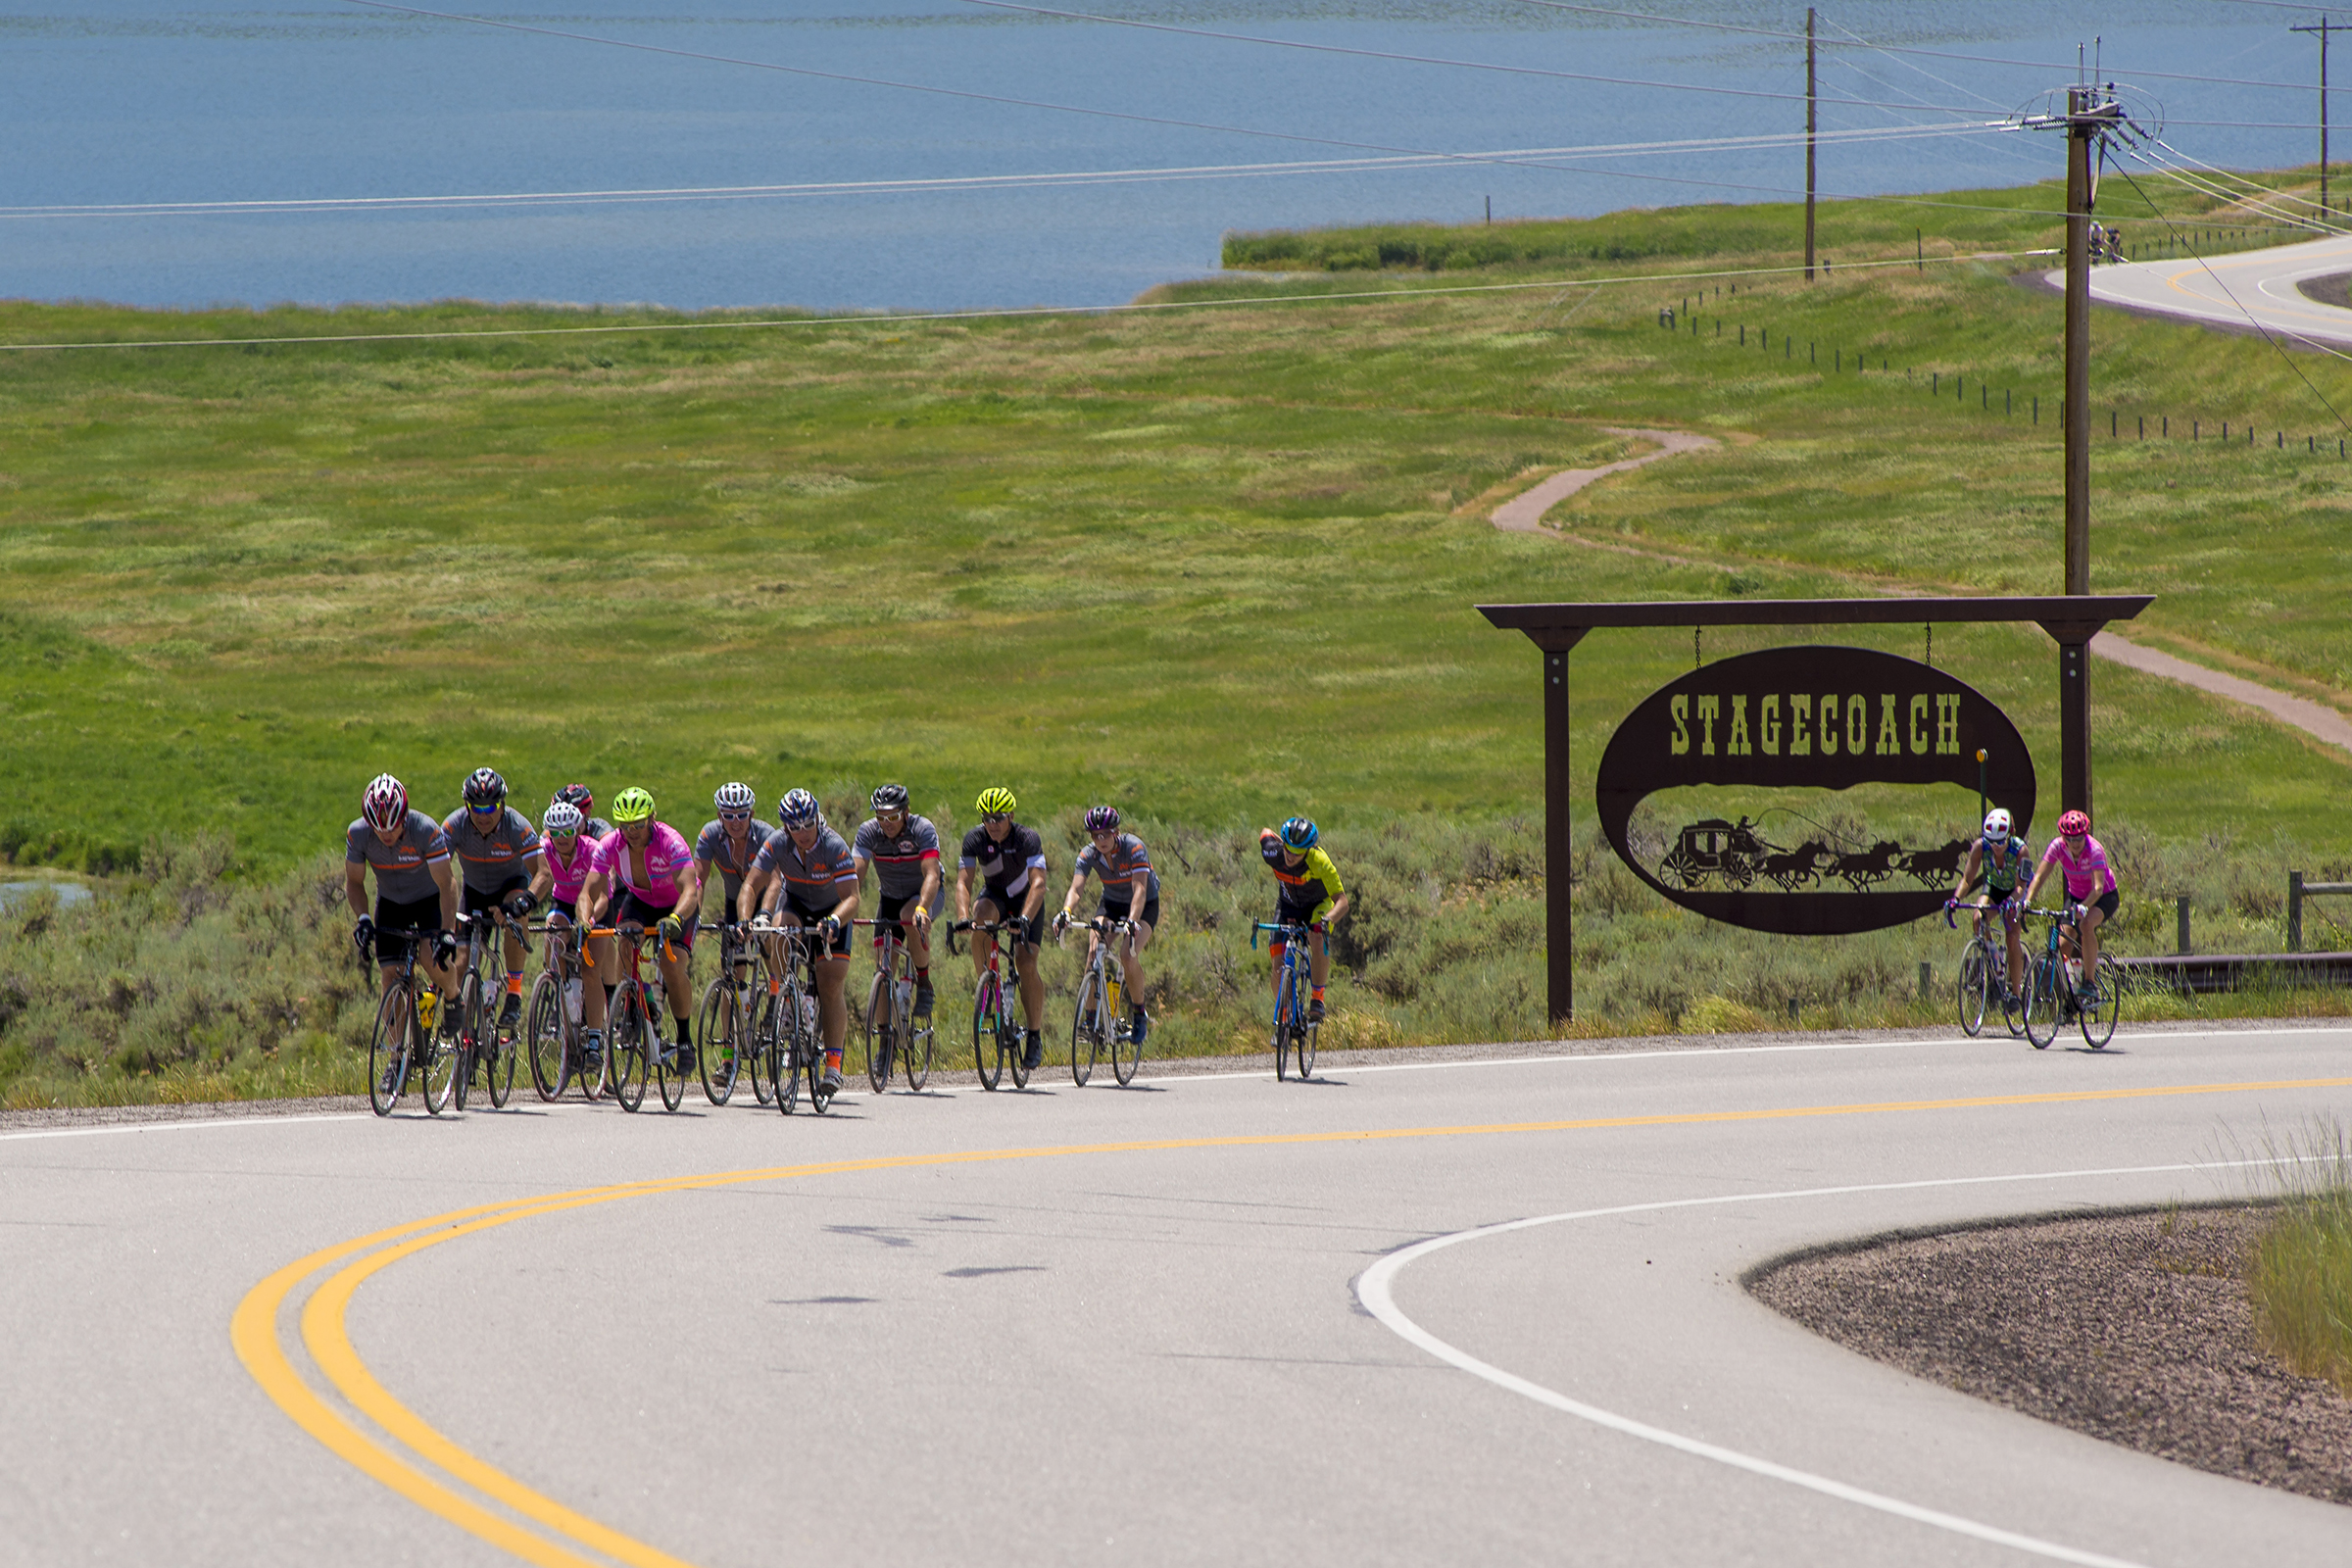 near Stagecoach, riders at Tour de Steamboat